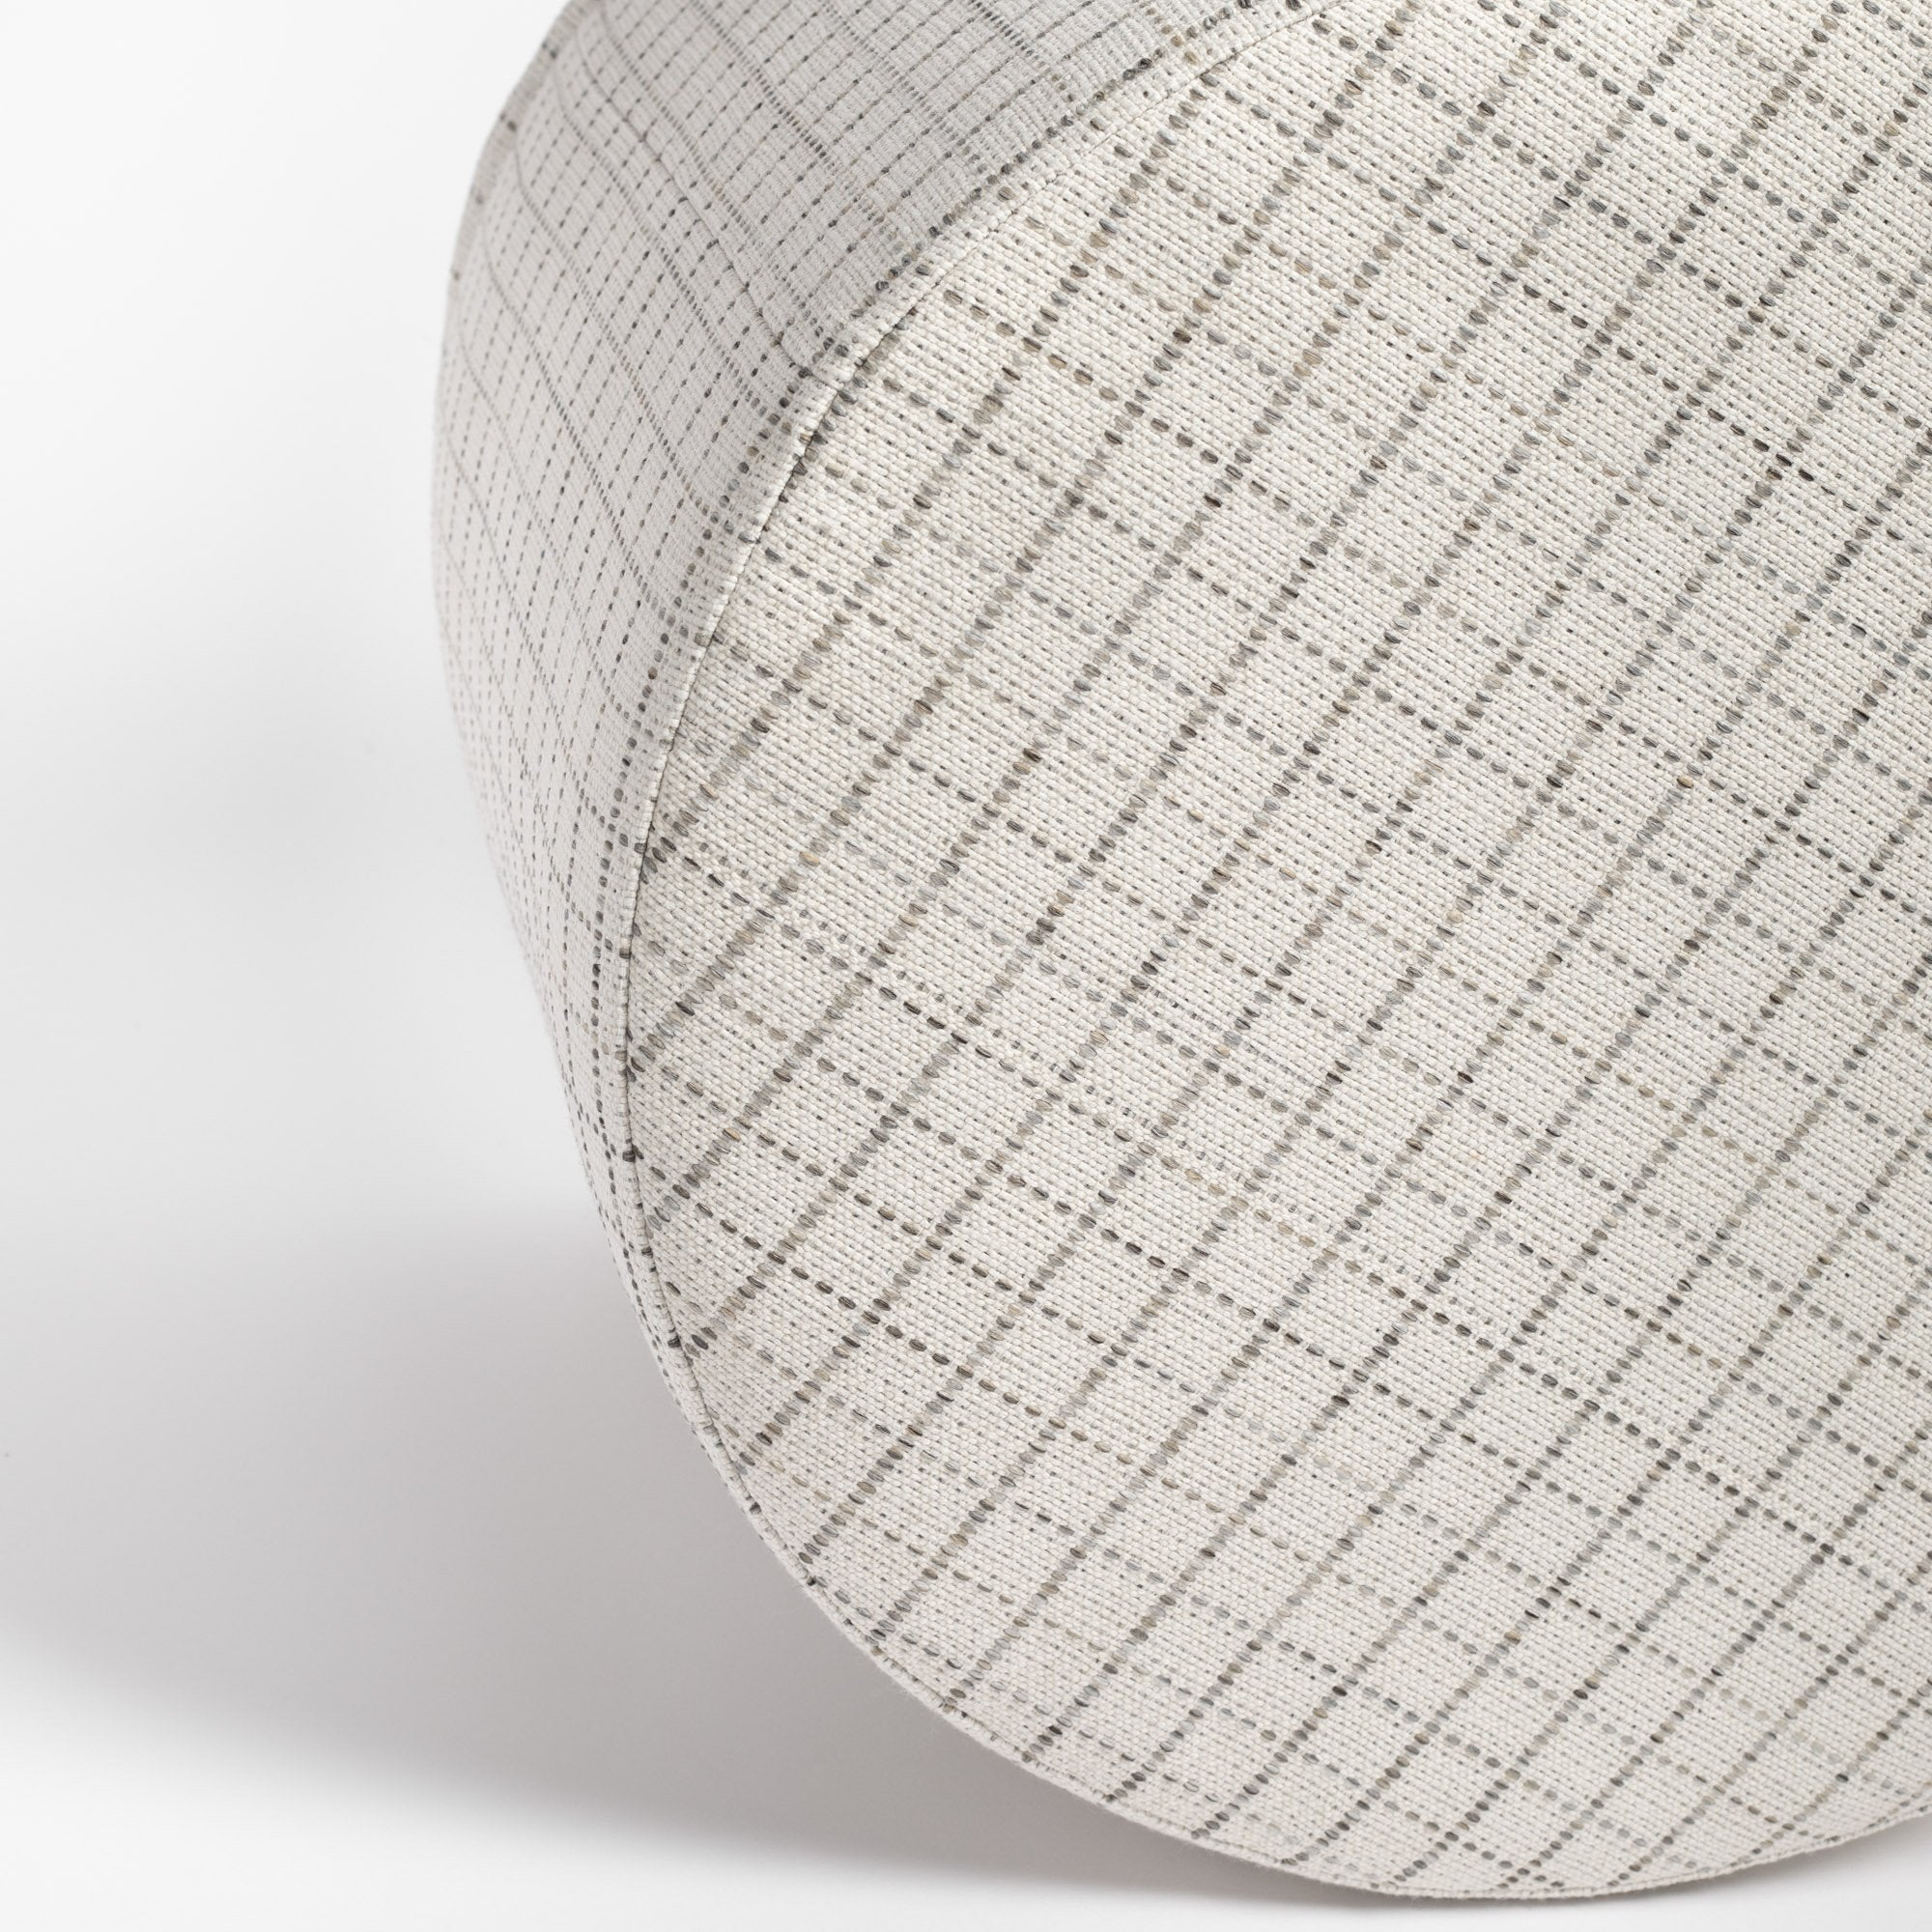 Keely Check Birch Ottoman, a cream and grey windowpane check round ottoman : top view